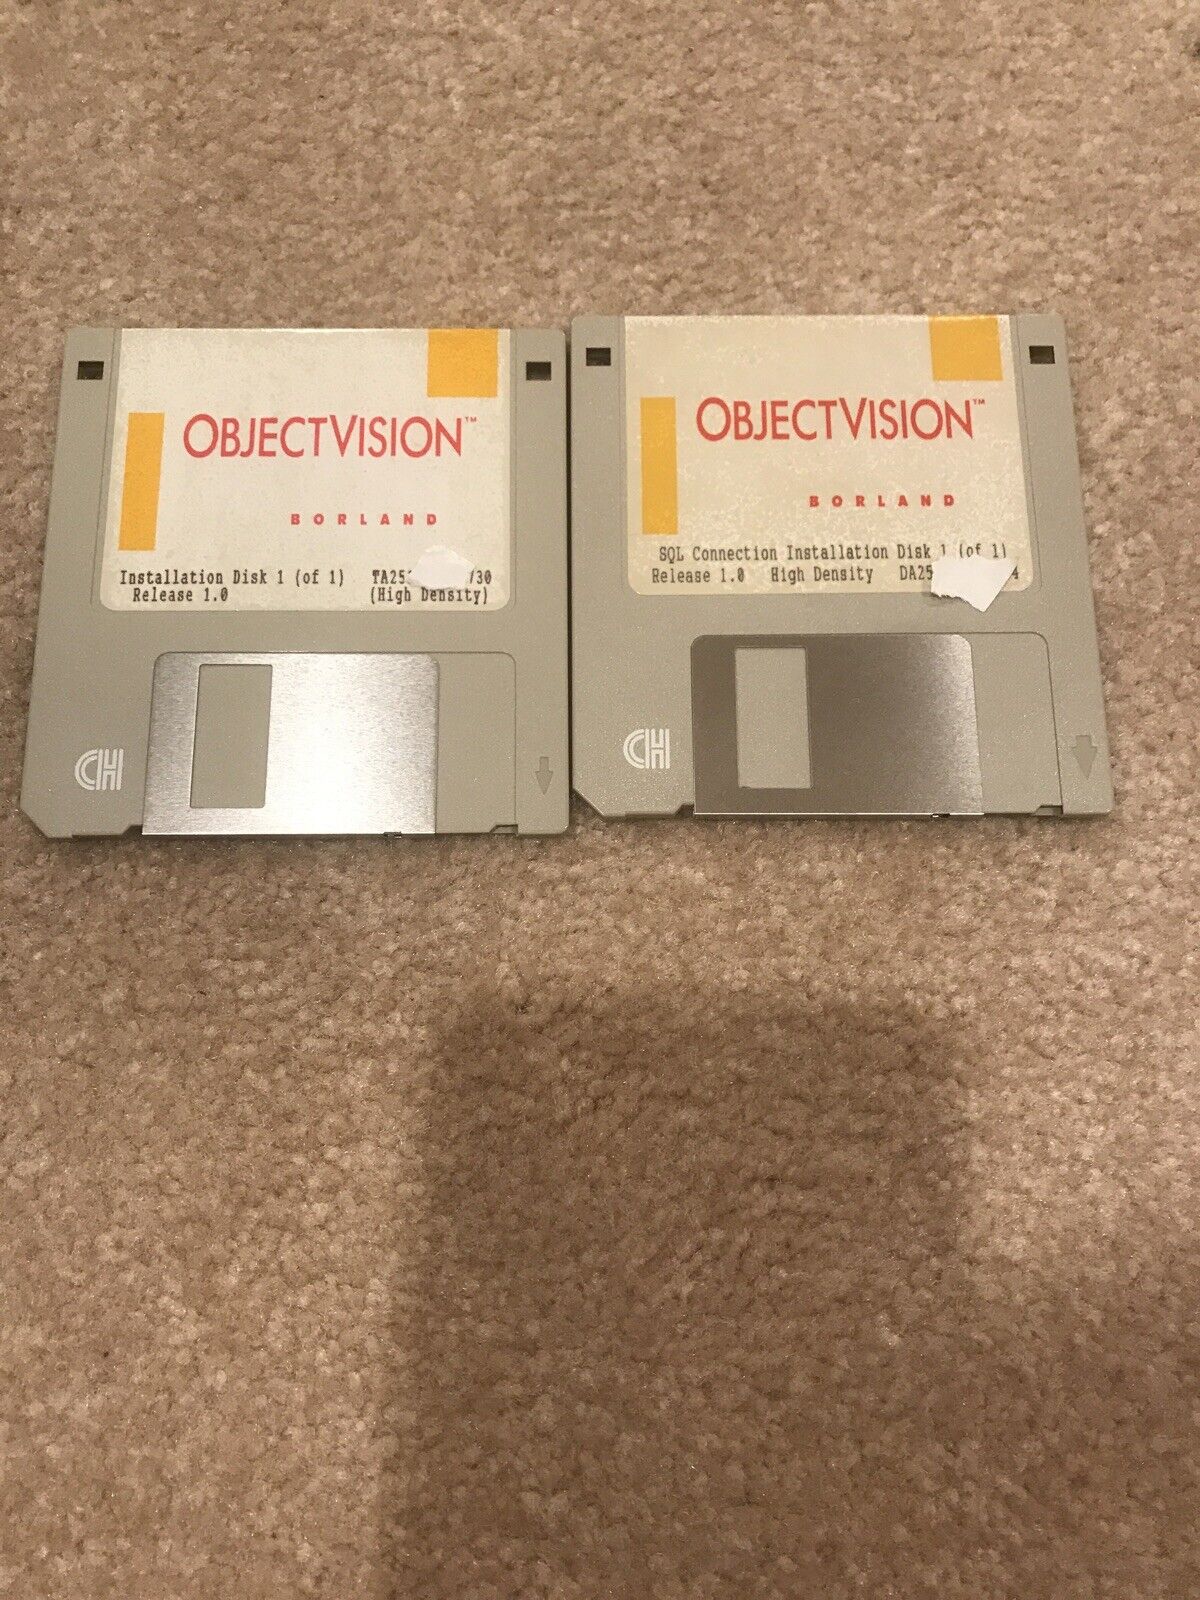 Borland ObjectVision Installation Disk SQL Connection Installation Release 1.0